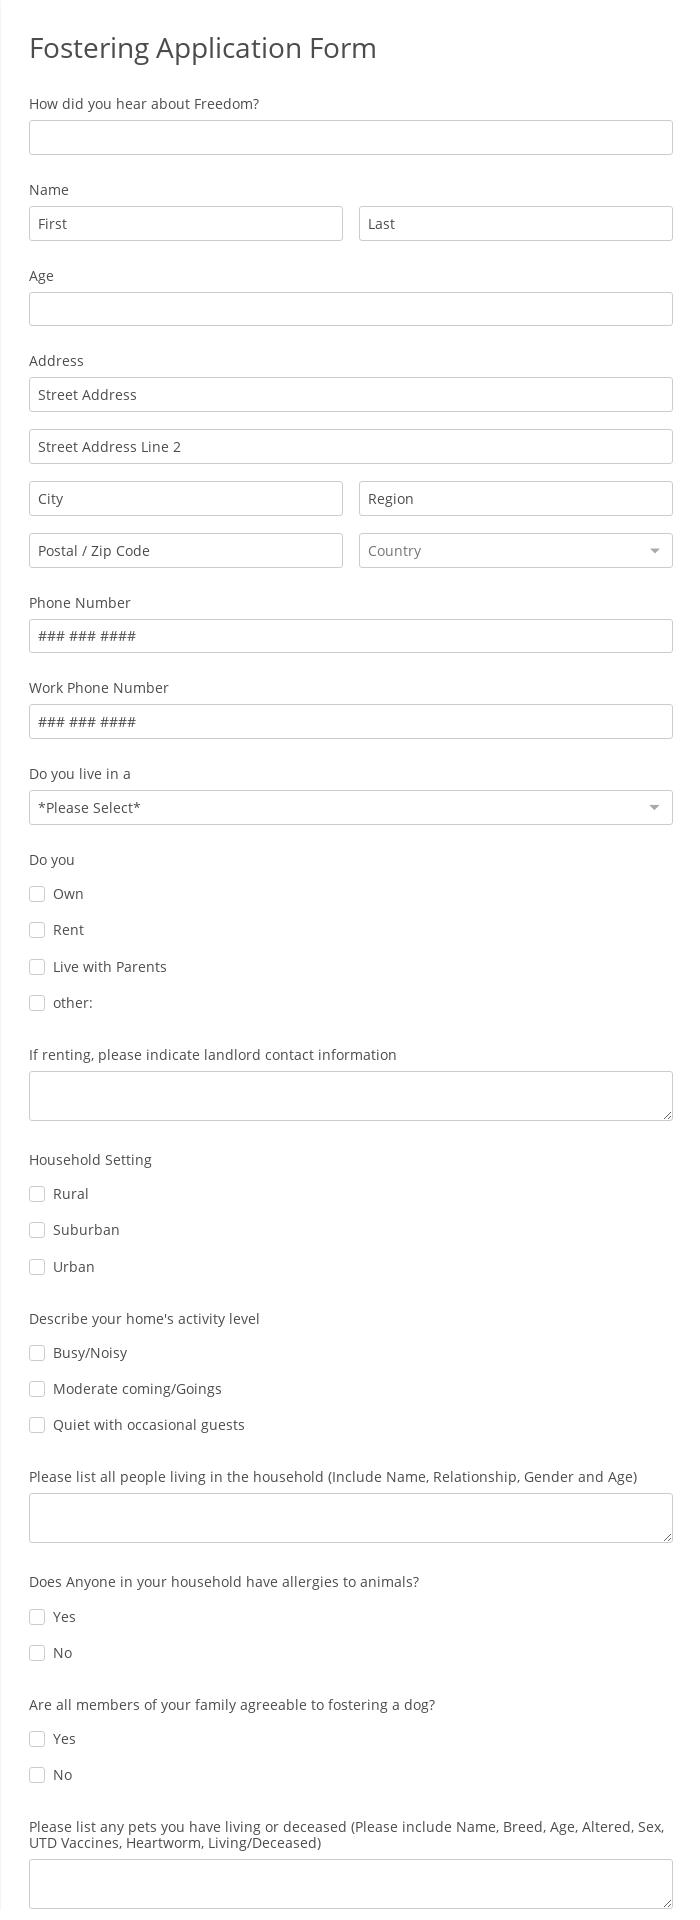 Fostering Application Form